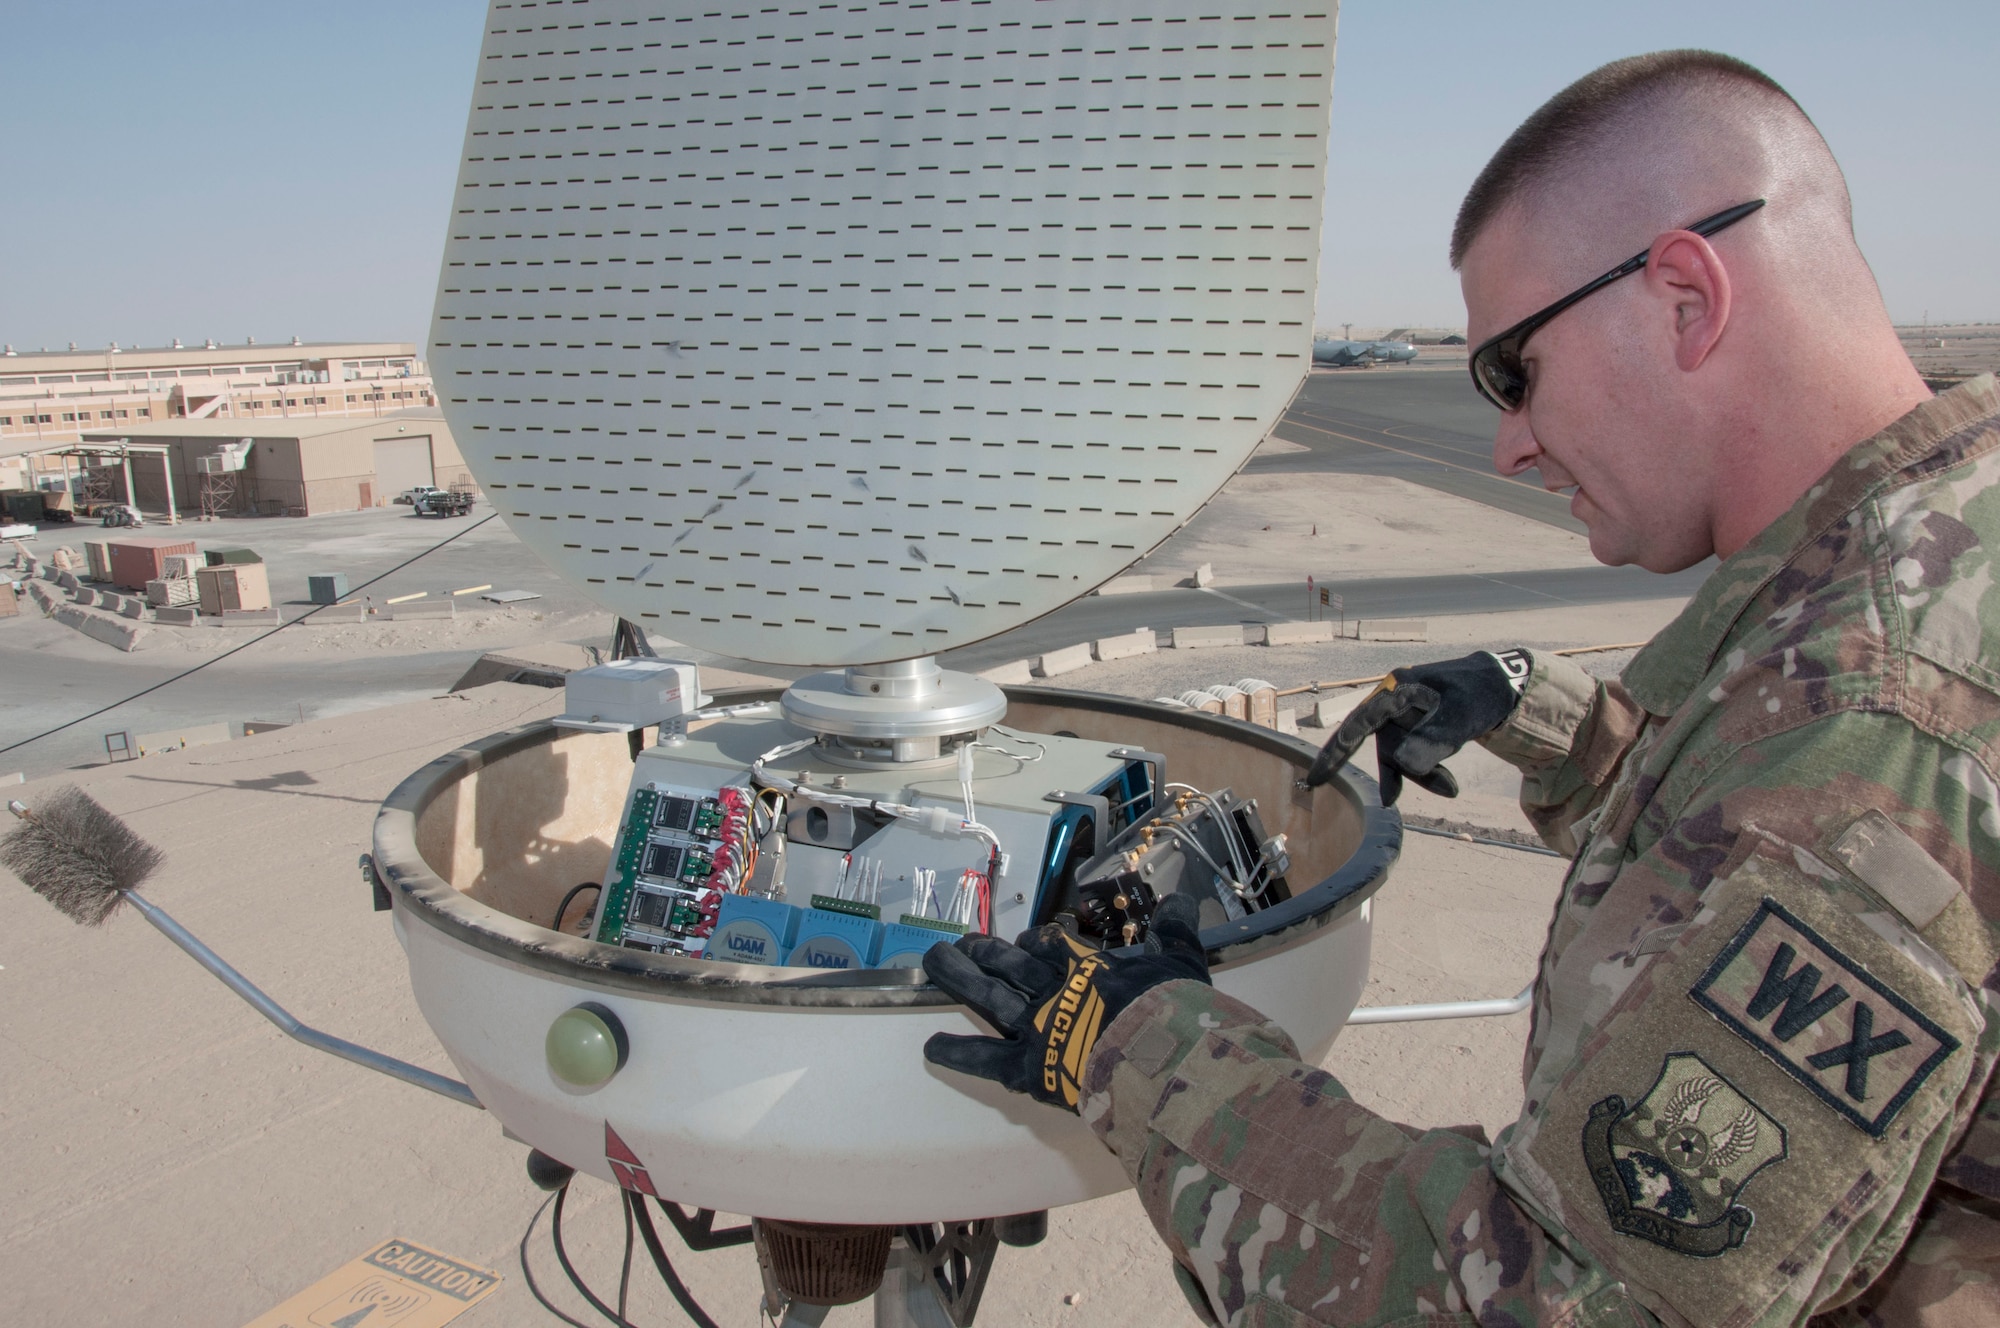 Tech. Sgt. Keith Wilson inspects the internal components of a portable Doppler radar unit during a preventative maintenance inspection at an undisclosed location in southwest Asia, June 11, 2017. Proper function of the Doppler allows for accurate weather forecasting.